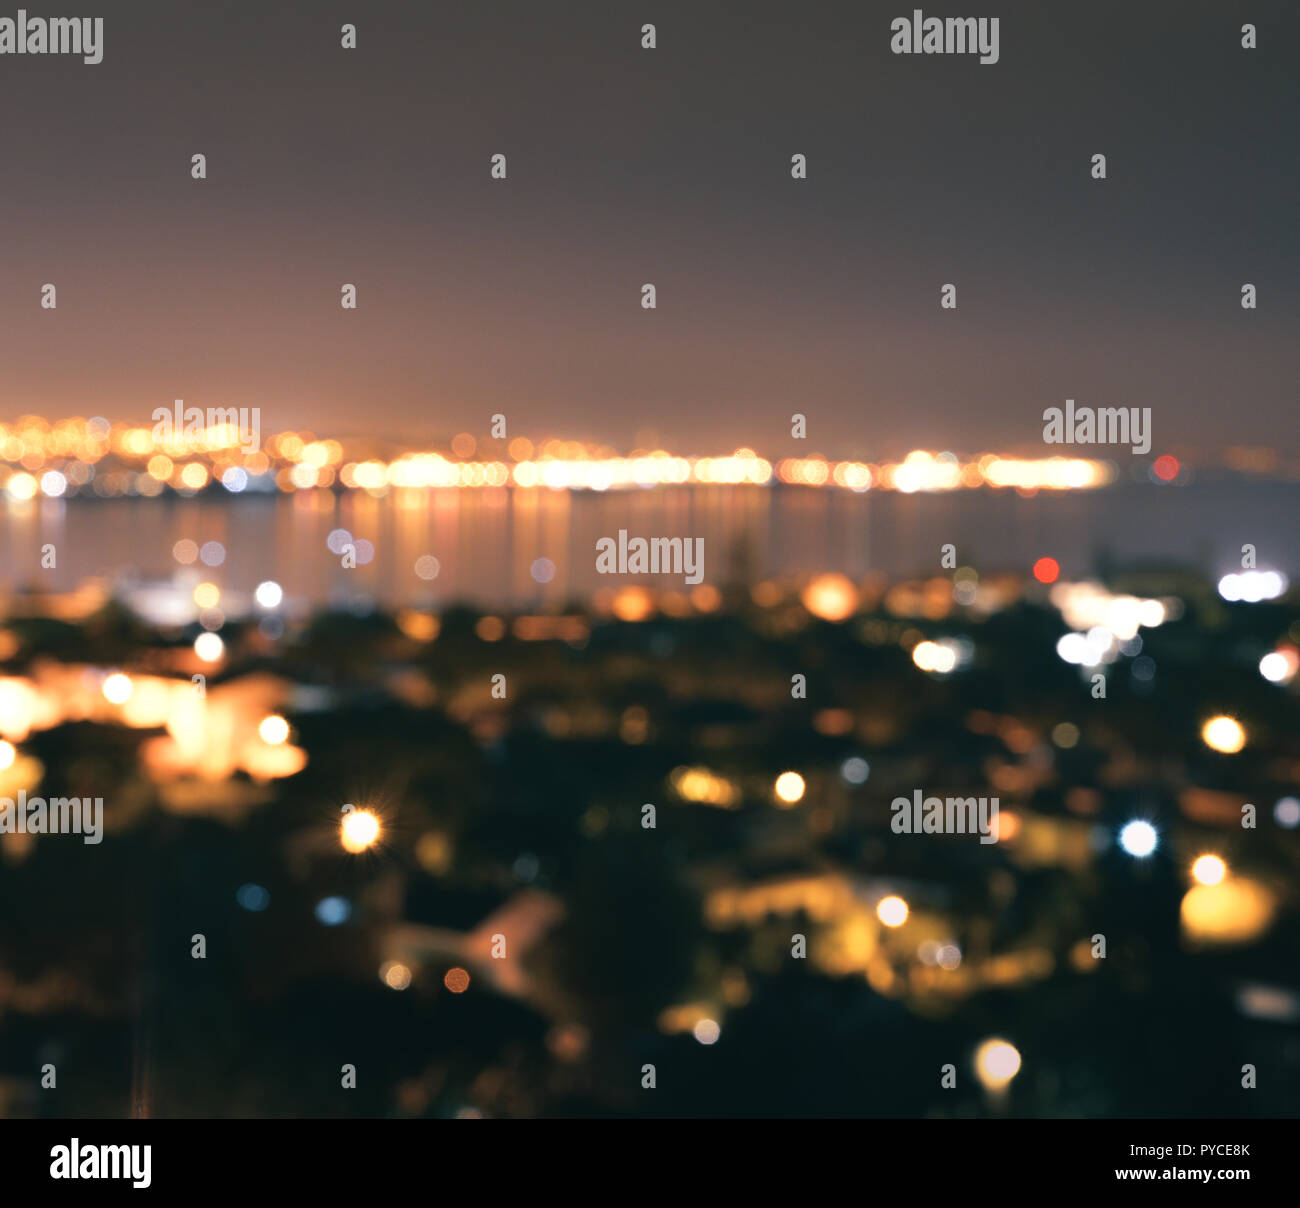 Purposely blurred bokeh lights at night with waterscape. Stock Photo